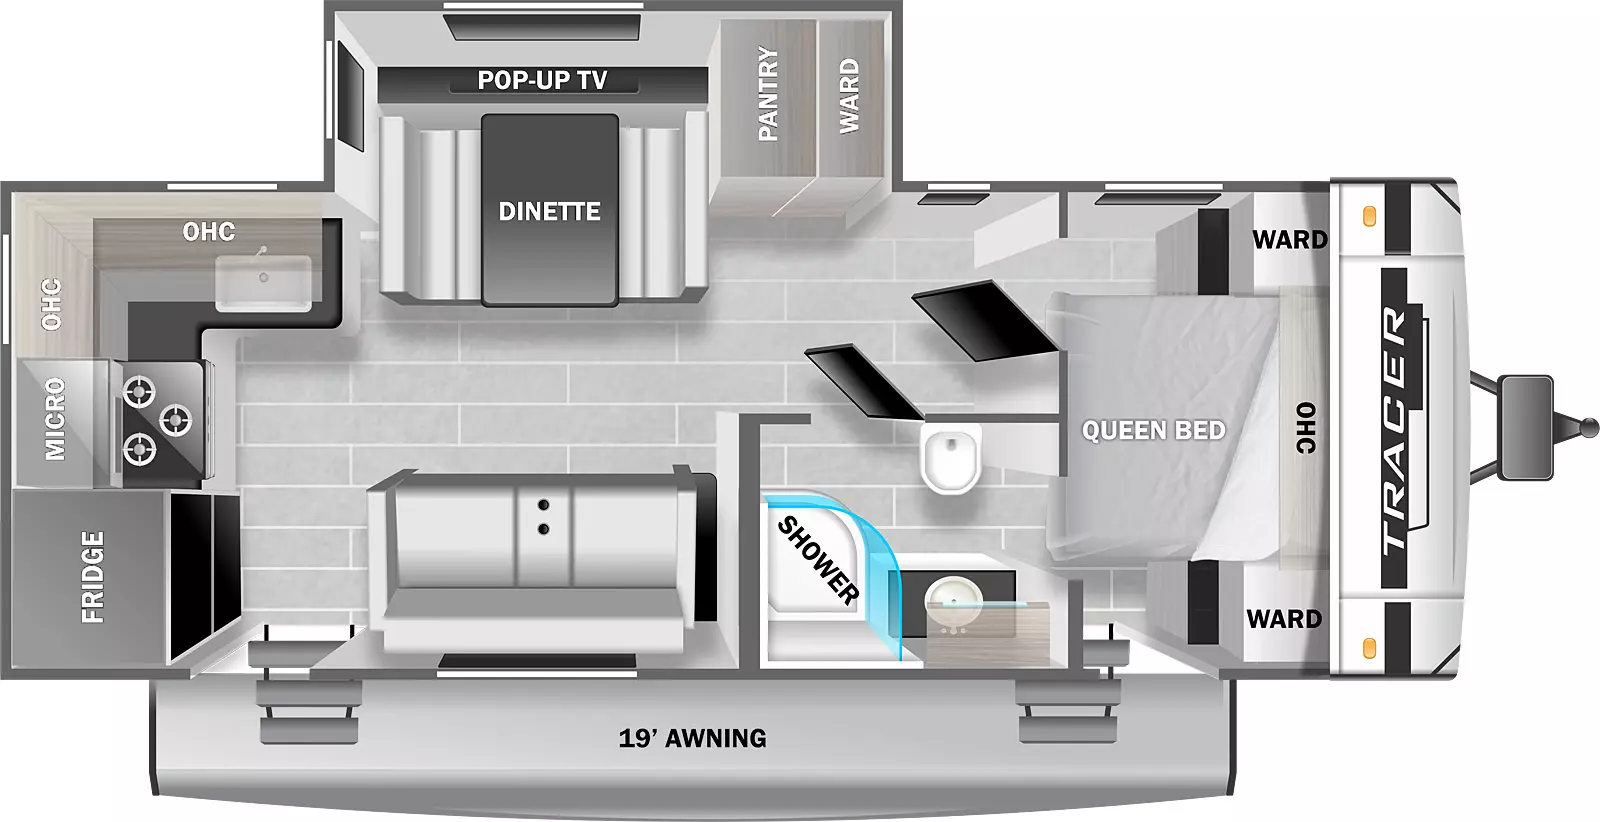 The Tracer 24RKS floorplan has two entry doors, a 19 foot power awning, and one slideout. The living area entry door is located near the rear of the RV. The rear of the RV has a refrigerator in the rear door side corner and an L-shaped counter top in the rear off door side corner. The countertop has a stove and a sink. The stove has a microwave above and overhead storage above the countertop and sink. The living area slideout has a booth dinette with a pop-up TV behind it. To the right of the dinette are a pantry and wardrobe. To the right of the pantry an wardrobe is a door leading to the front bedroom area. Directly a cross from the pantry and wardrobe is a door leading to the bathroom. The bathroom has a shower, a sink with a medicine cabinet above, a door leading to the bedroom, and a toilet. An entry door leads directly into the bedroom. The bedroom has a queen bed with a wardrobe and night stand on the right and left and overhead storage above.